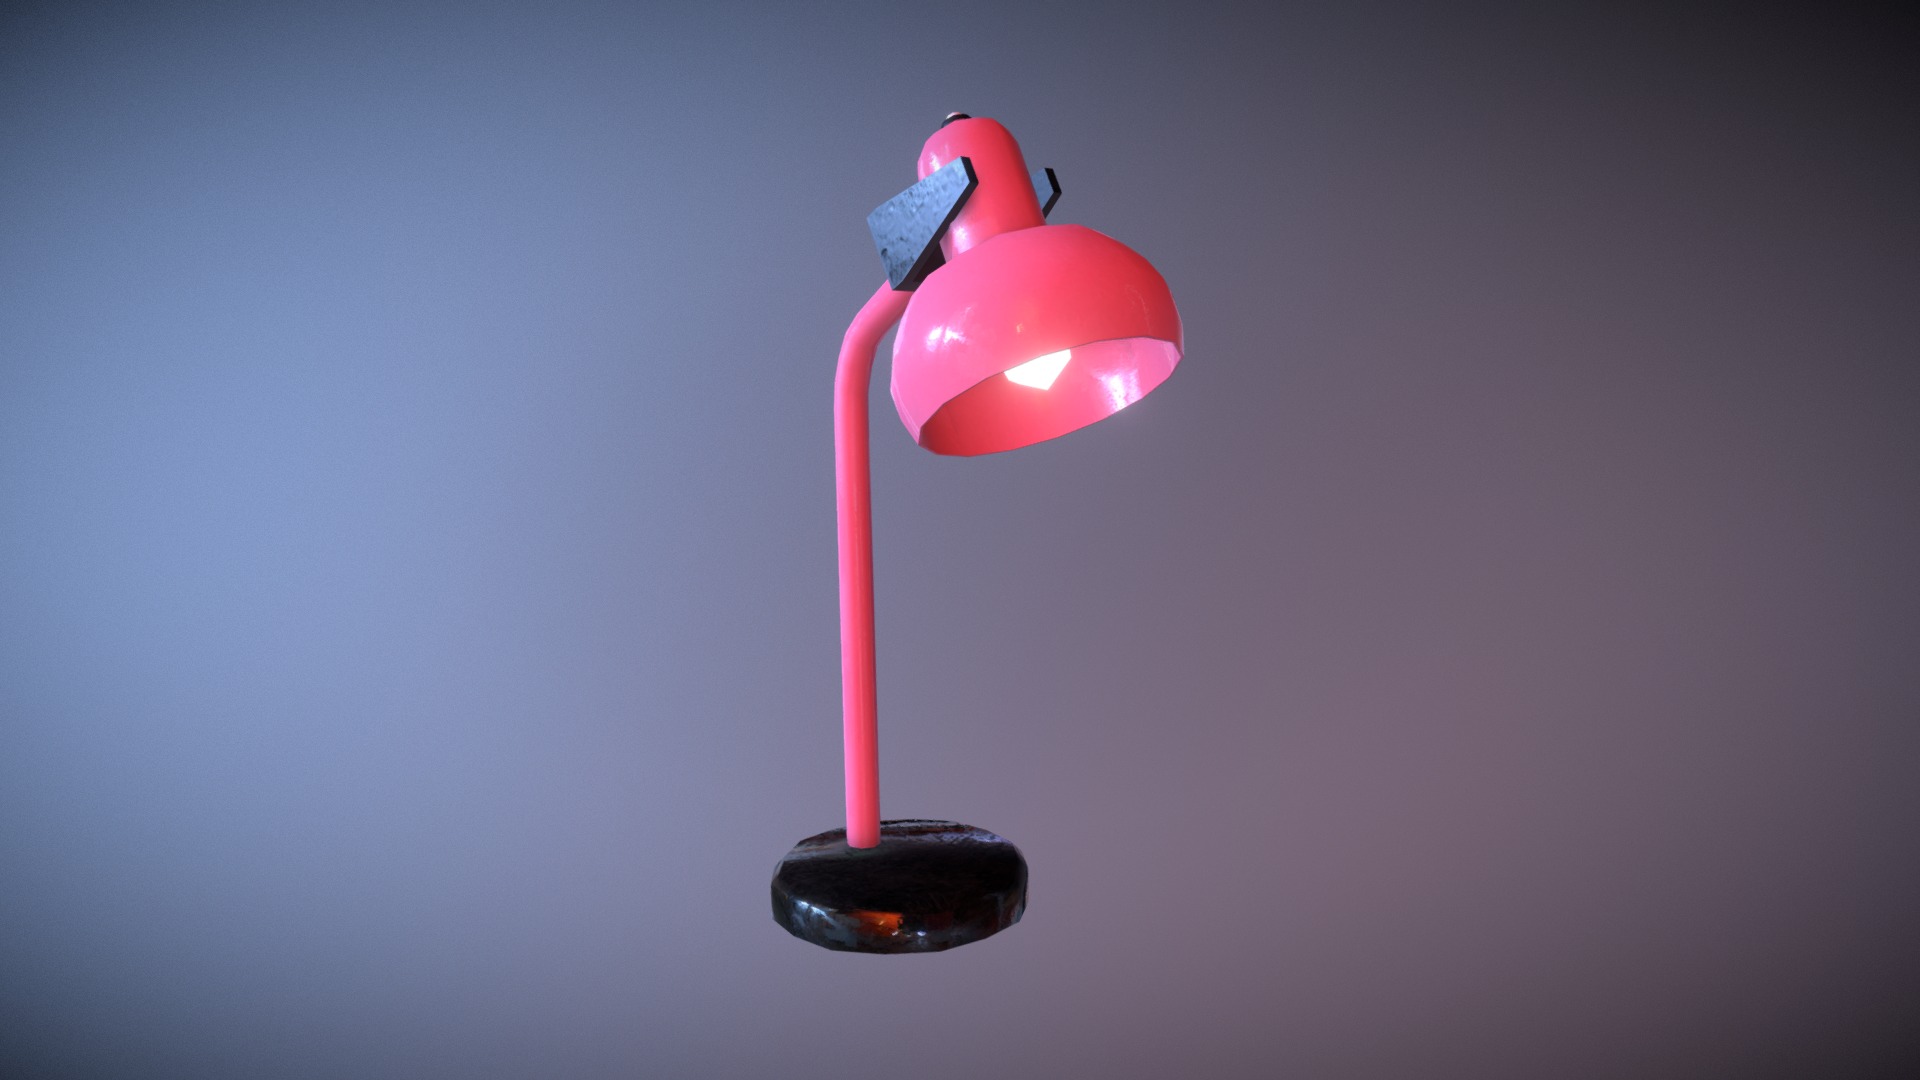 3D model Game Ready School Desk Lamp Pink Low Poly - This is a 3D model of the Game Ready School Desk Lamp Pink Low Poly. The 3D model is about a red and white lamp.